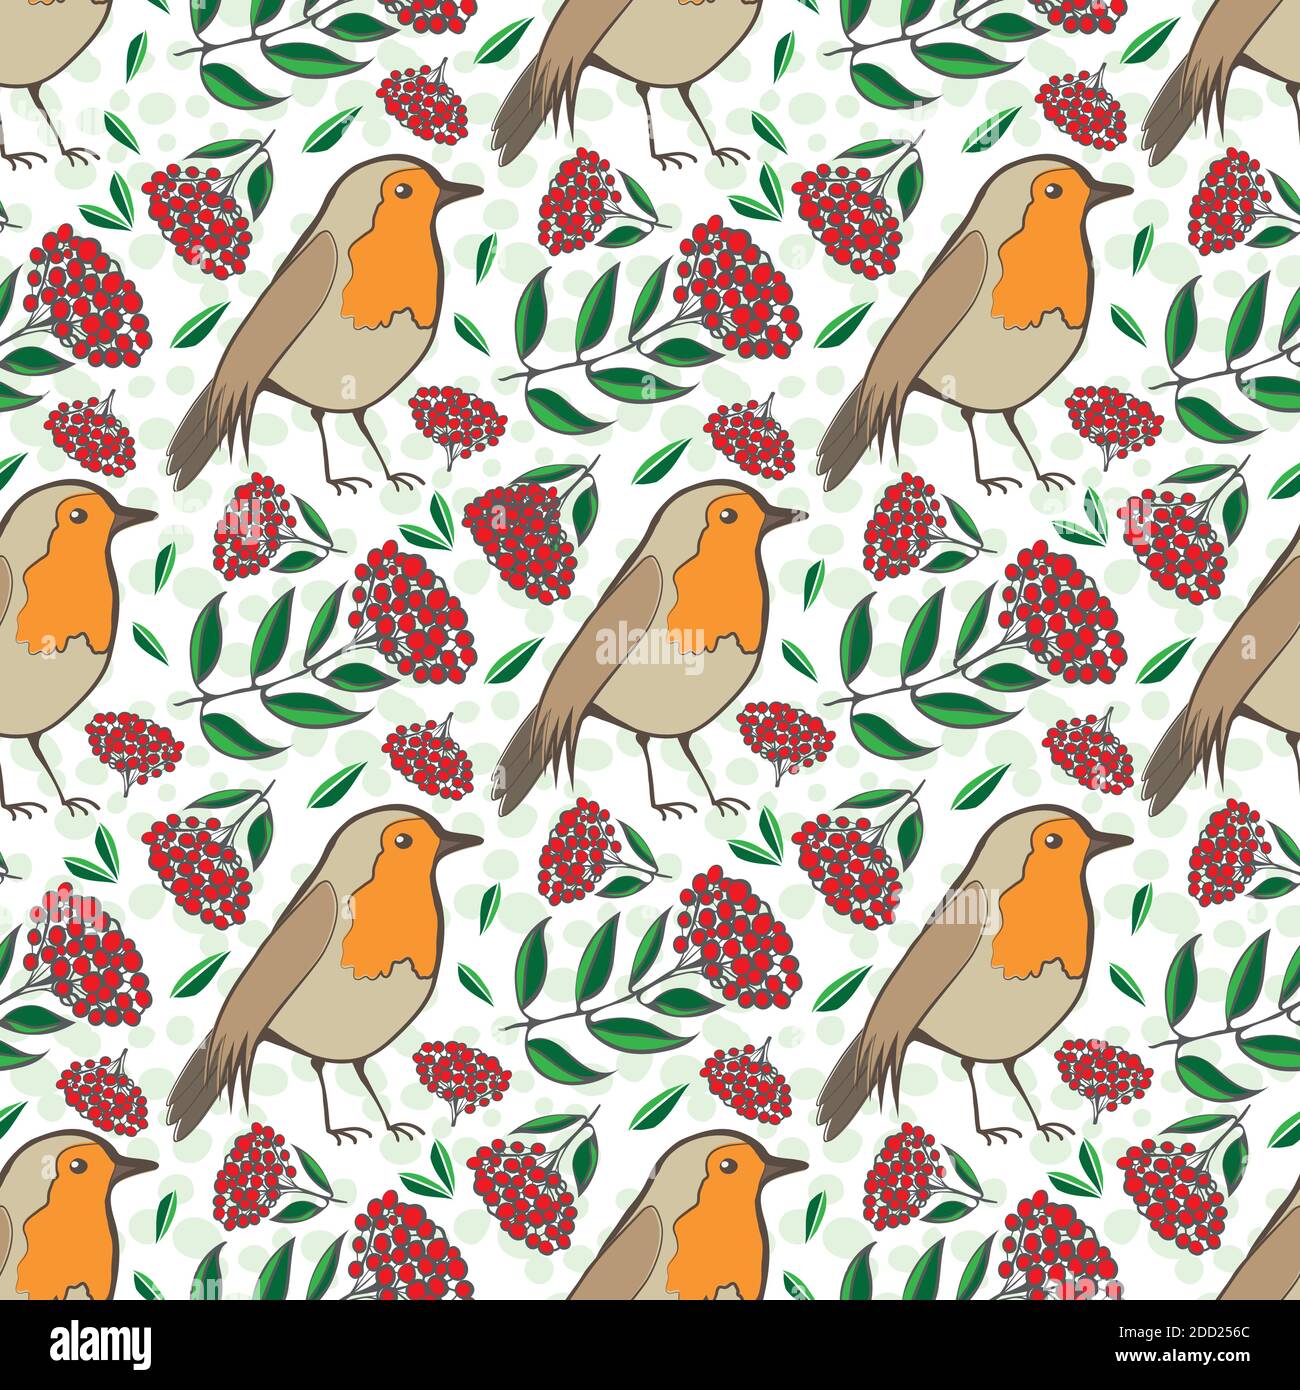 Robin Redbreast, berries and leaf foliage seamless vector pattern background. Red green backdrop with garden birds and fruit of cotoneaster plant Stock Vector